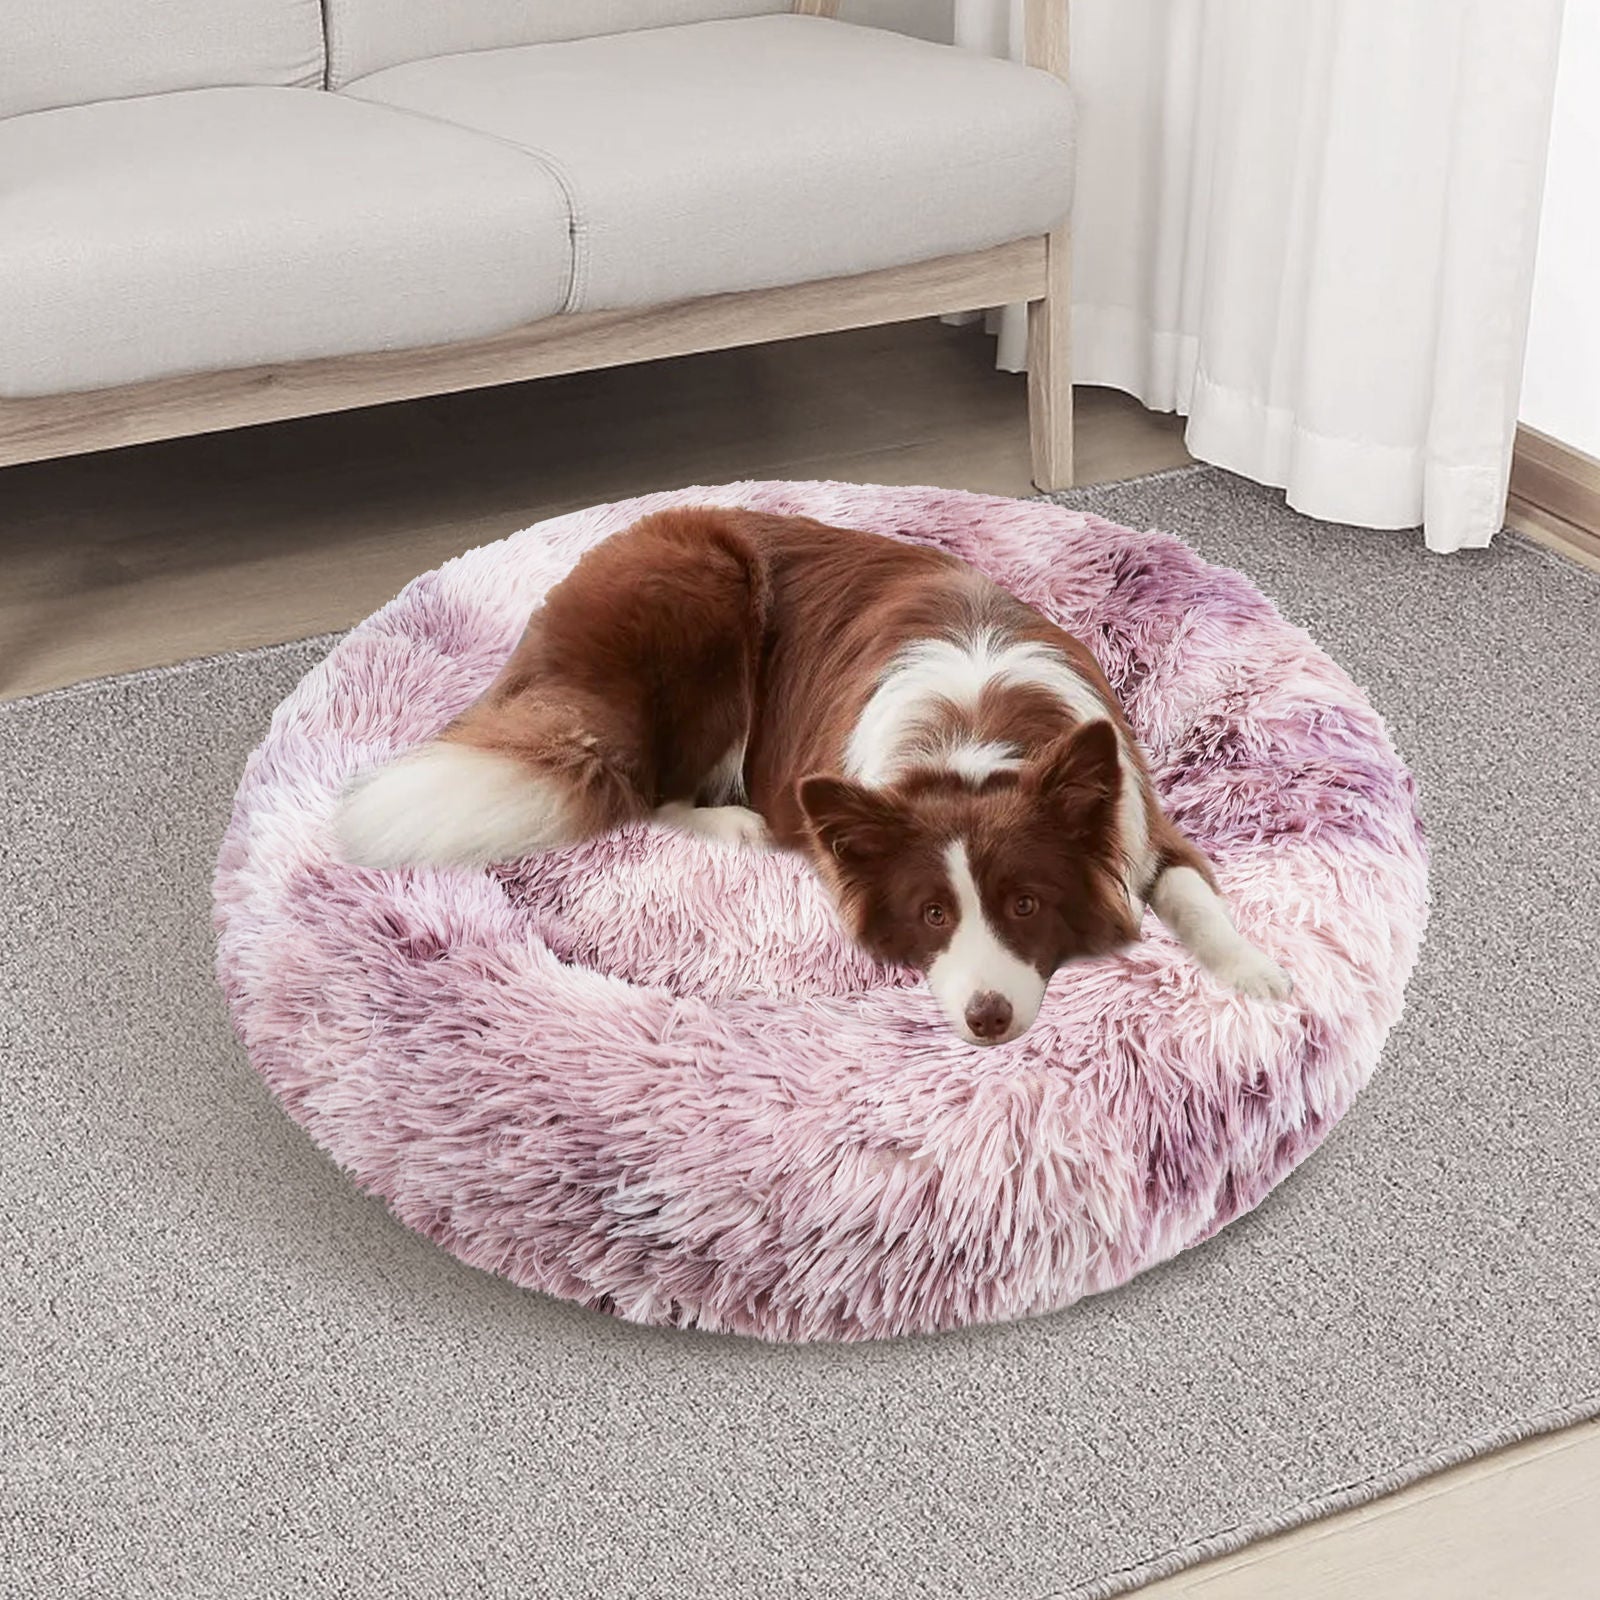 Pawfriends Cat Dog Pet Round Calming Bed Warm Soft Plush